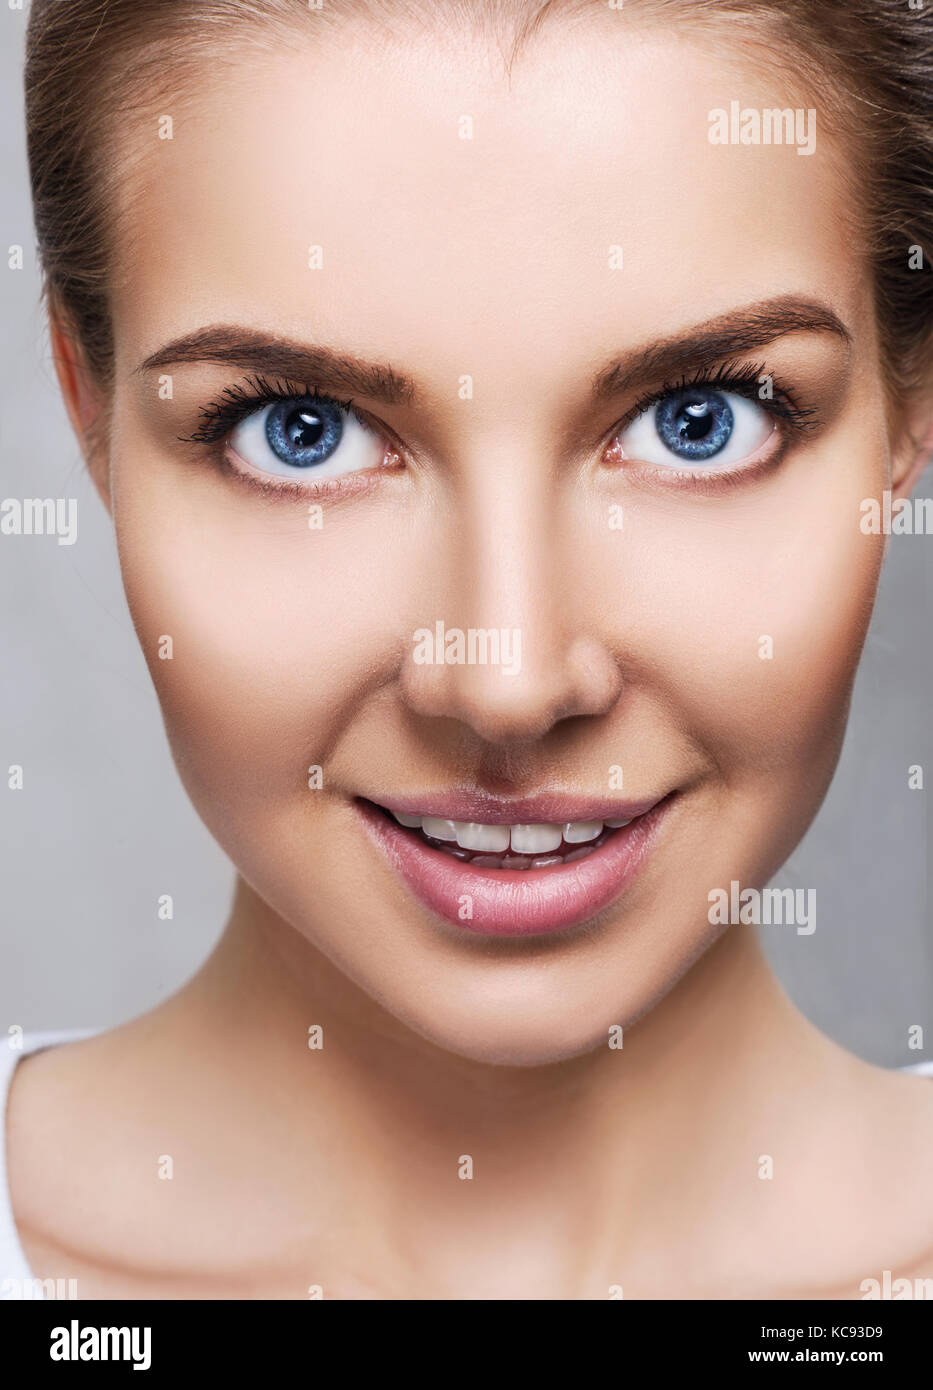 Young woman with perfect skin and makeup. Stock Photo